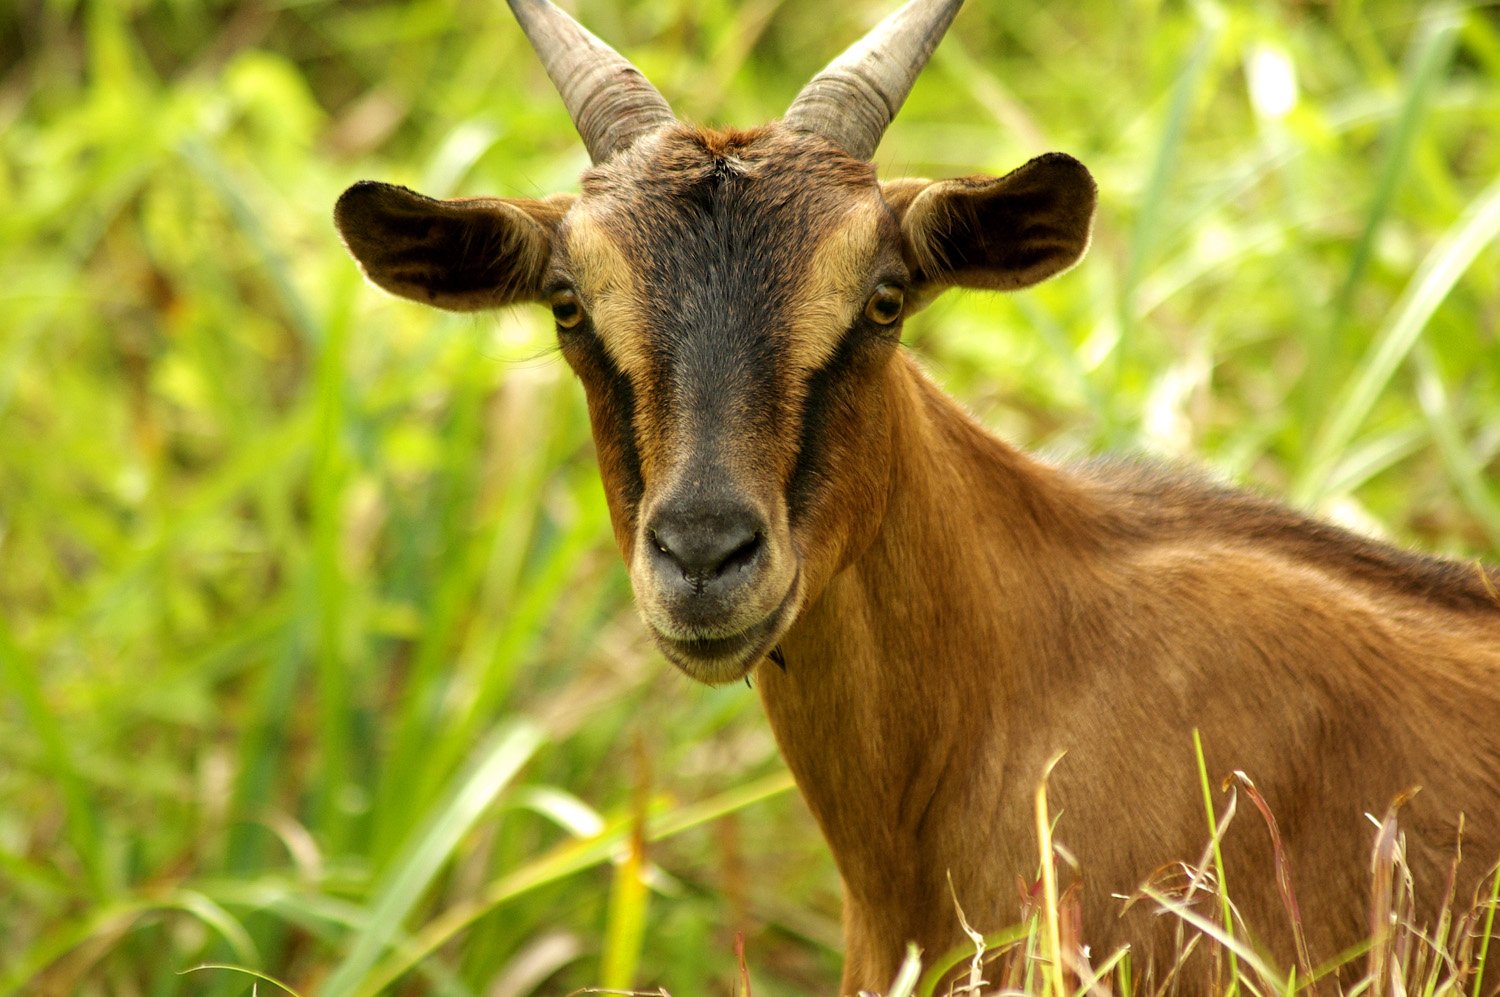 the horns of a goat are hanging in some tall grass